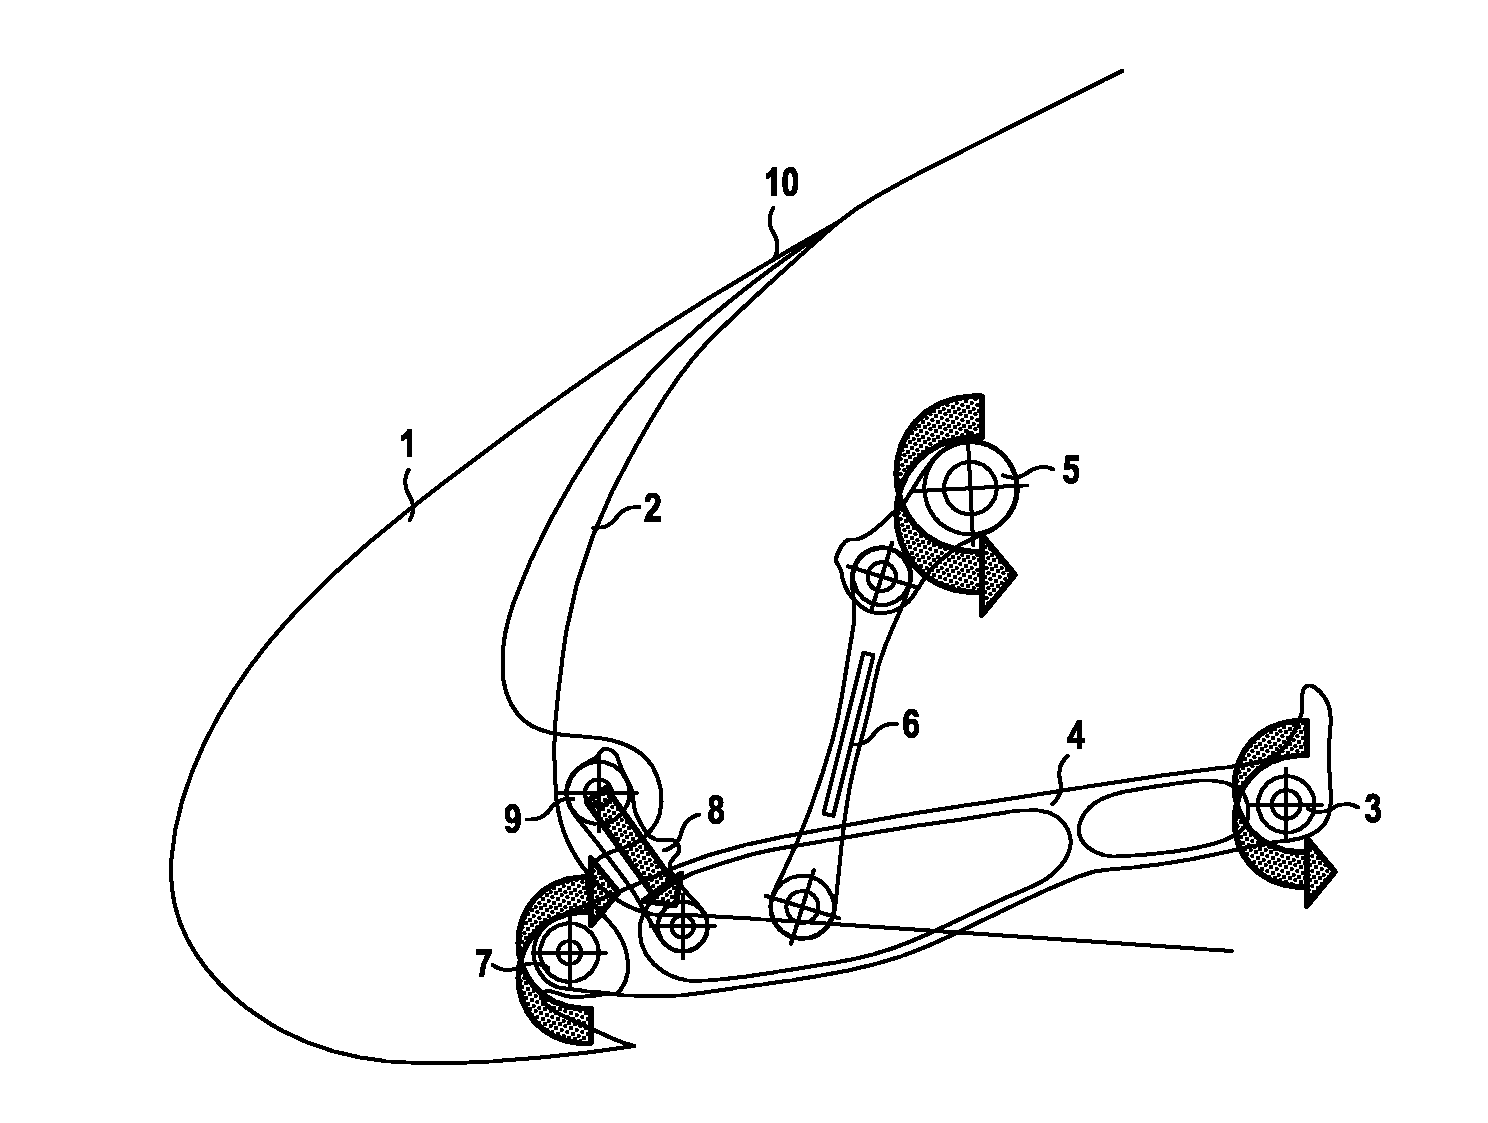 Actuation system for leading edge high-lift device